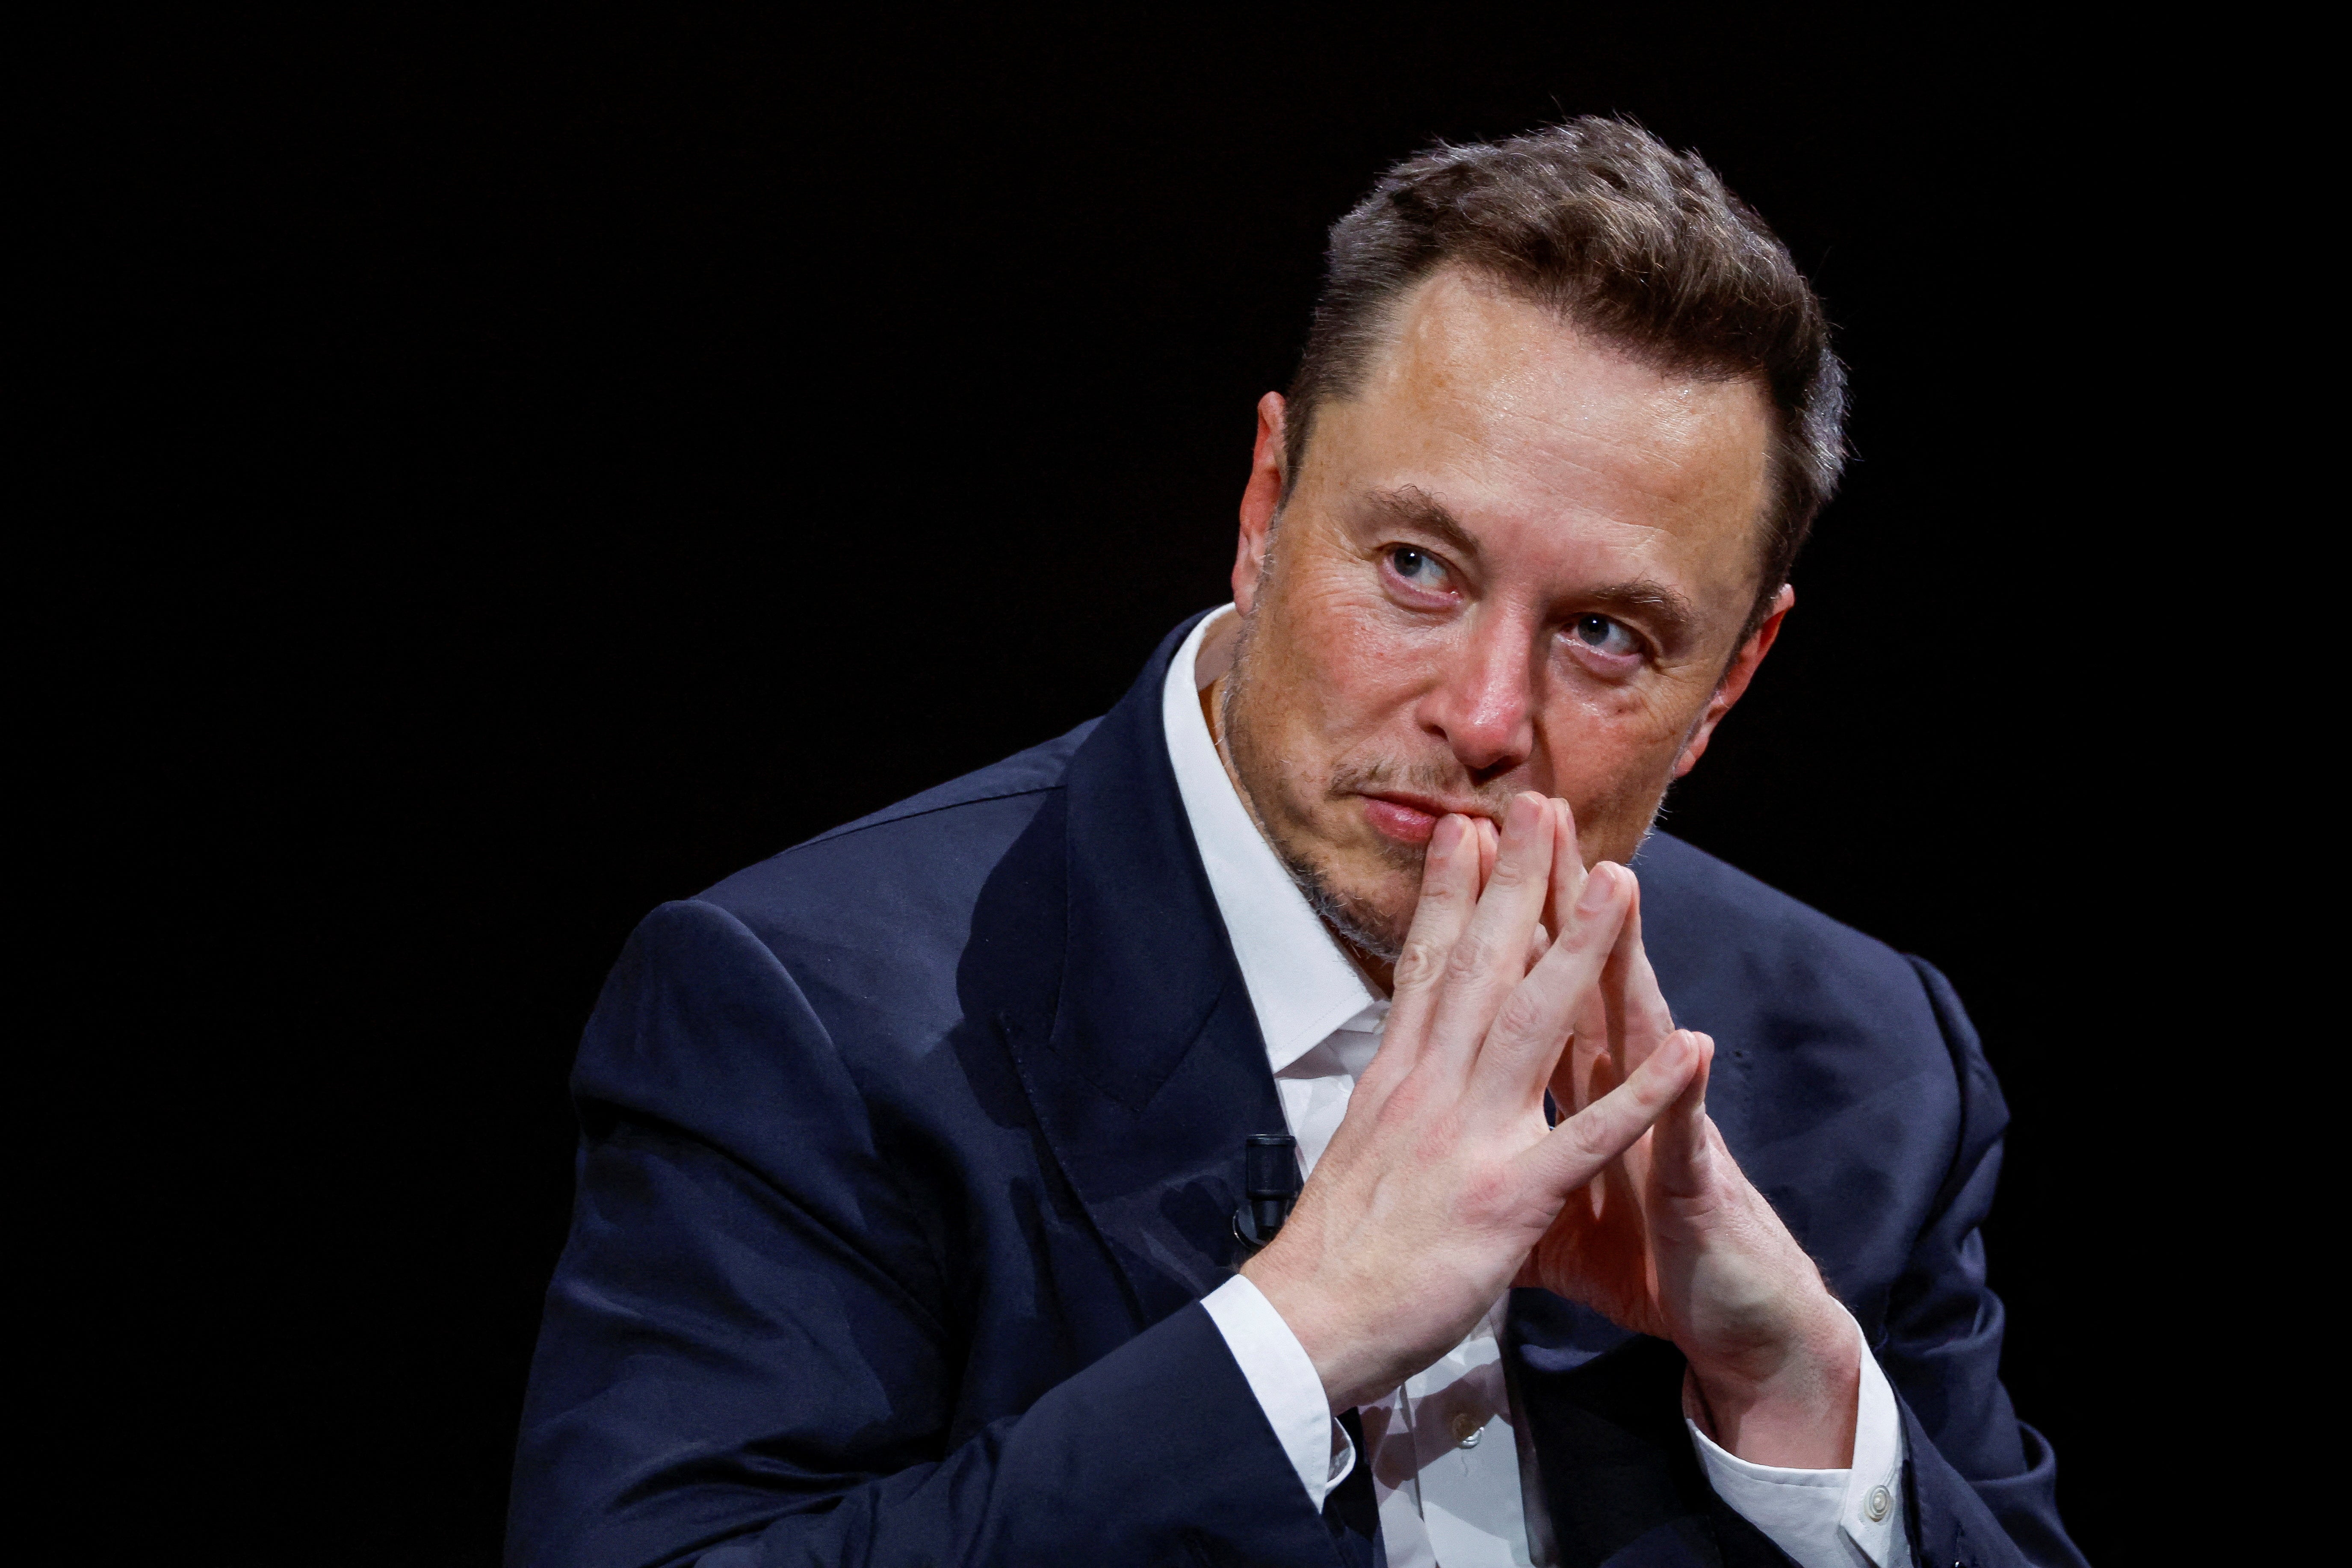 Elon Musk says temporary move is to stop ‘extreme levels of data scraping’